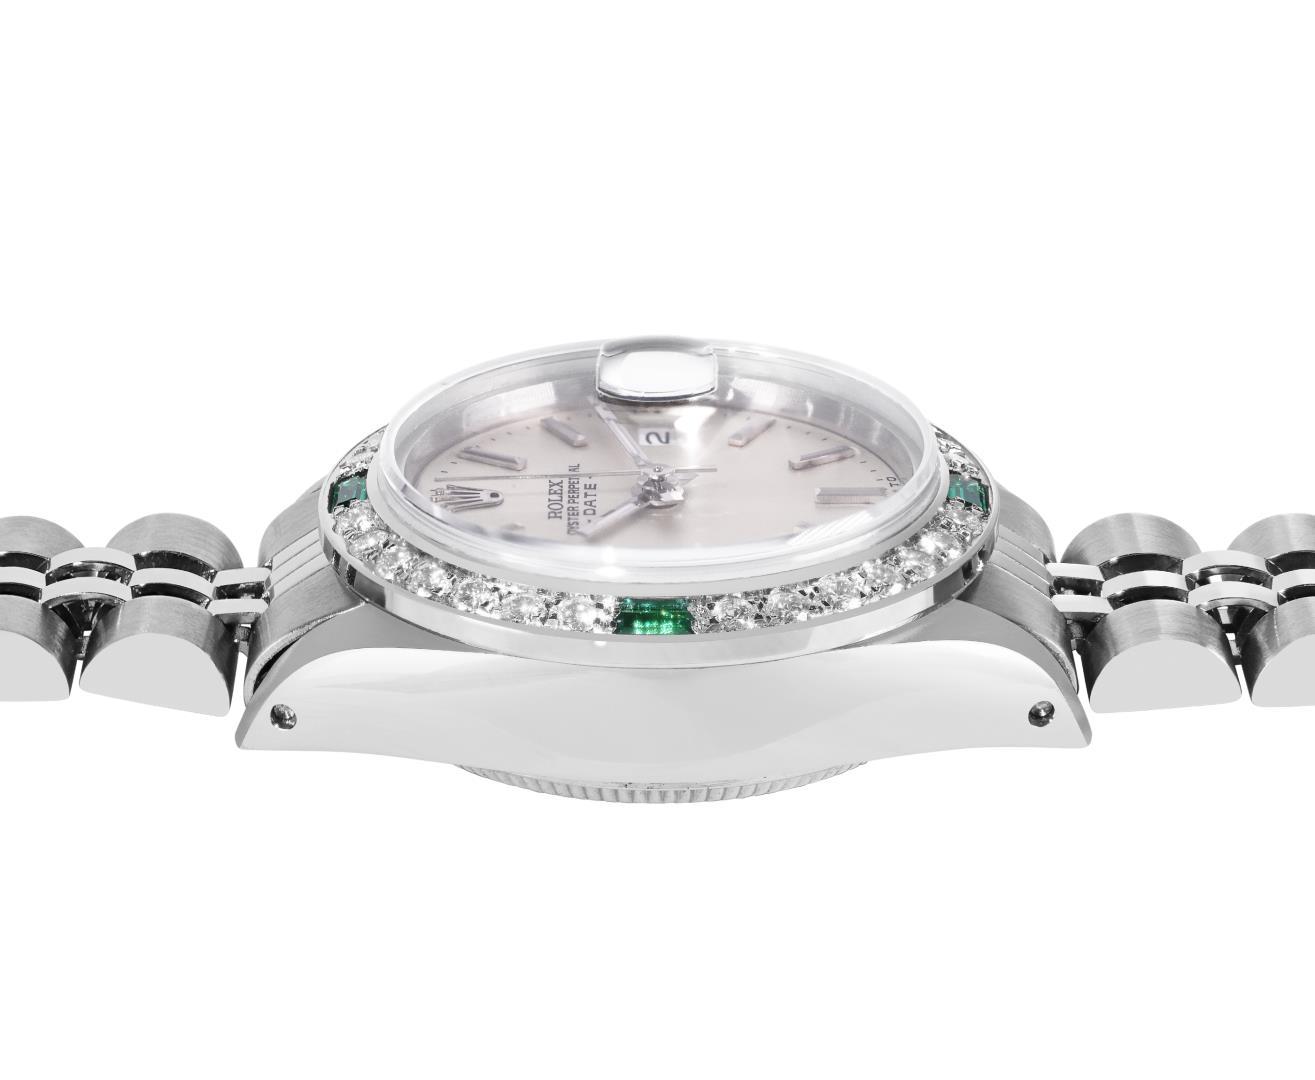 Rolex Ladies Stainless Steel Silver Index Diamond And Emerald Date Watch